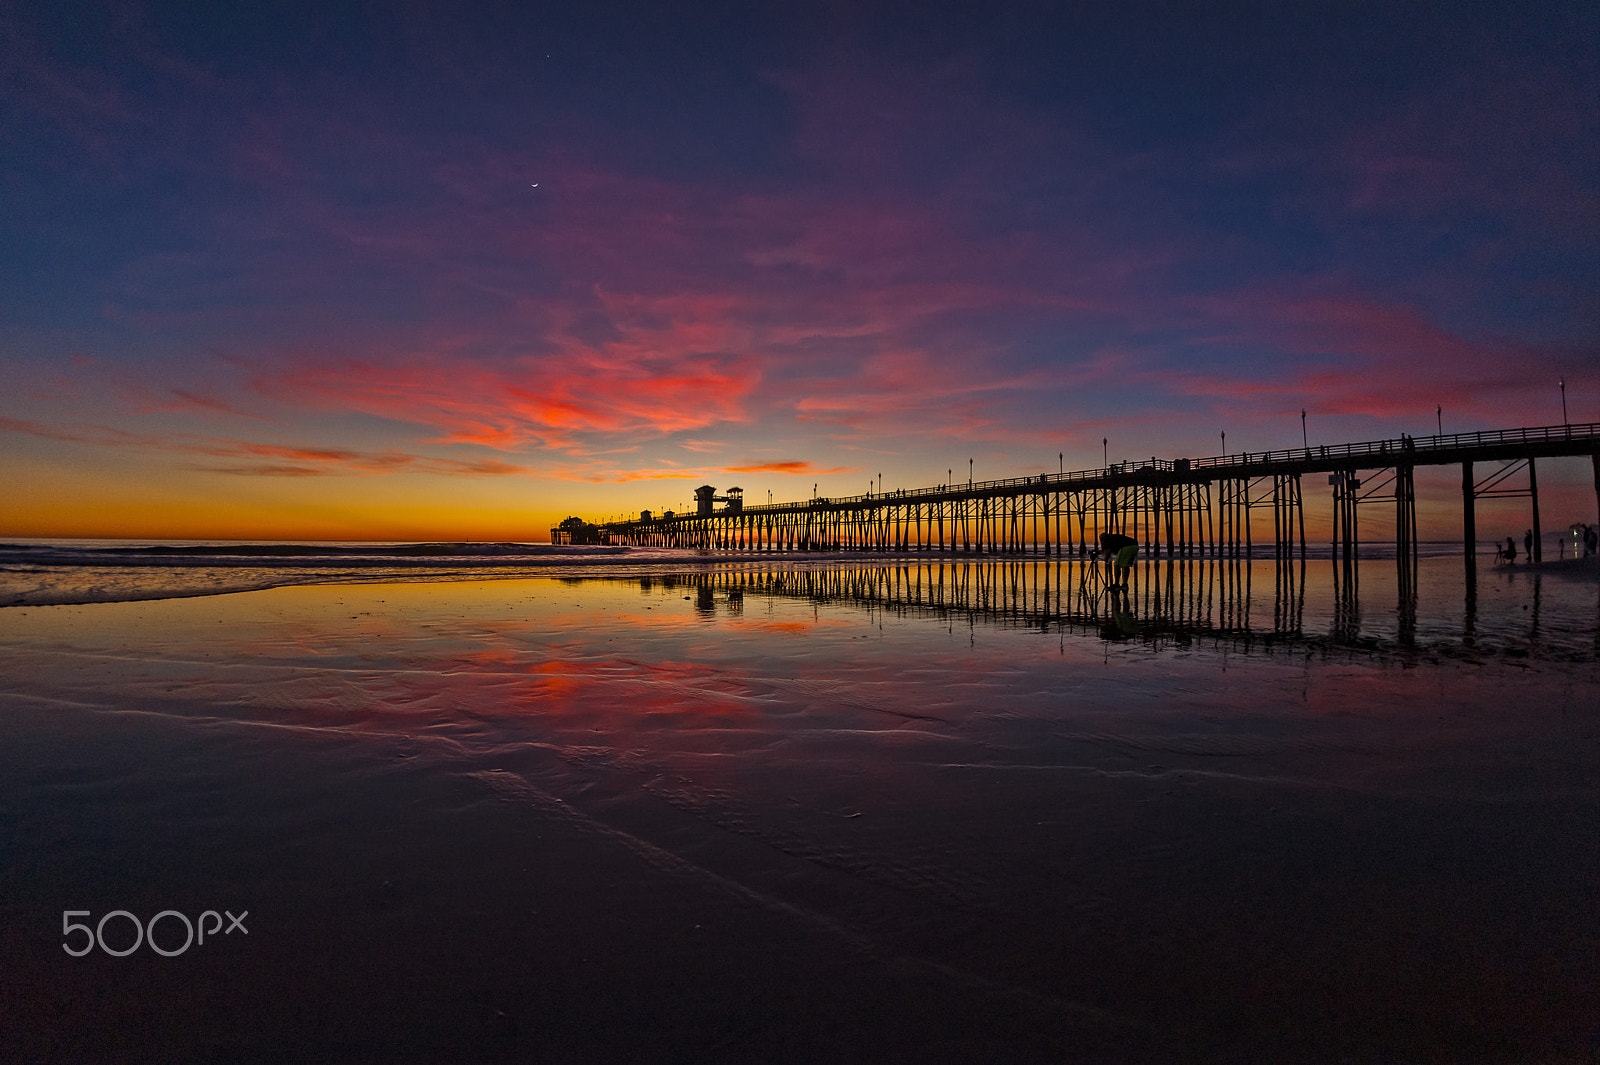 Nikon D700 sample photo. Fiery sunset at the pier in oceanside - january 30, 2017 photography